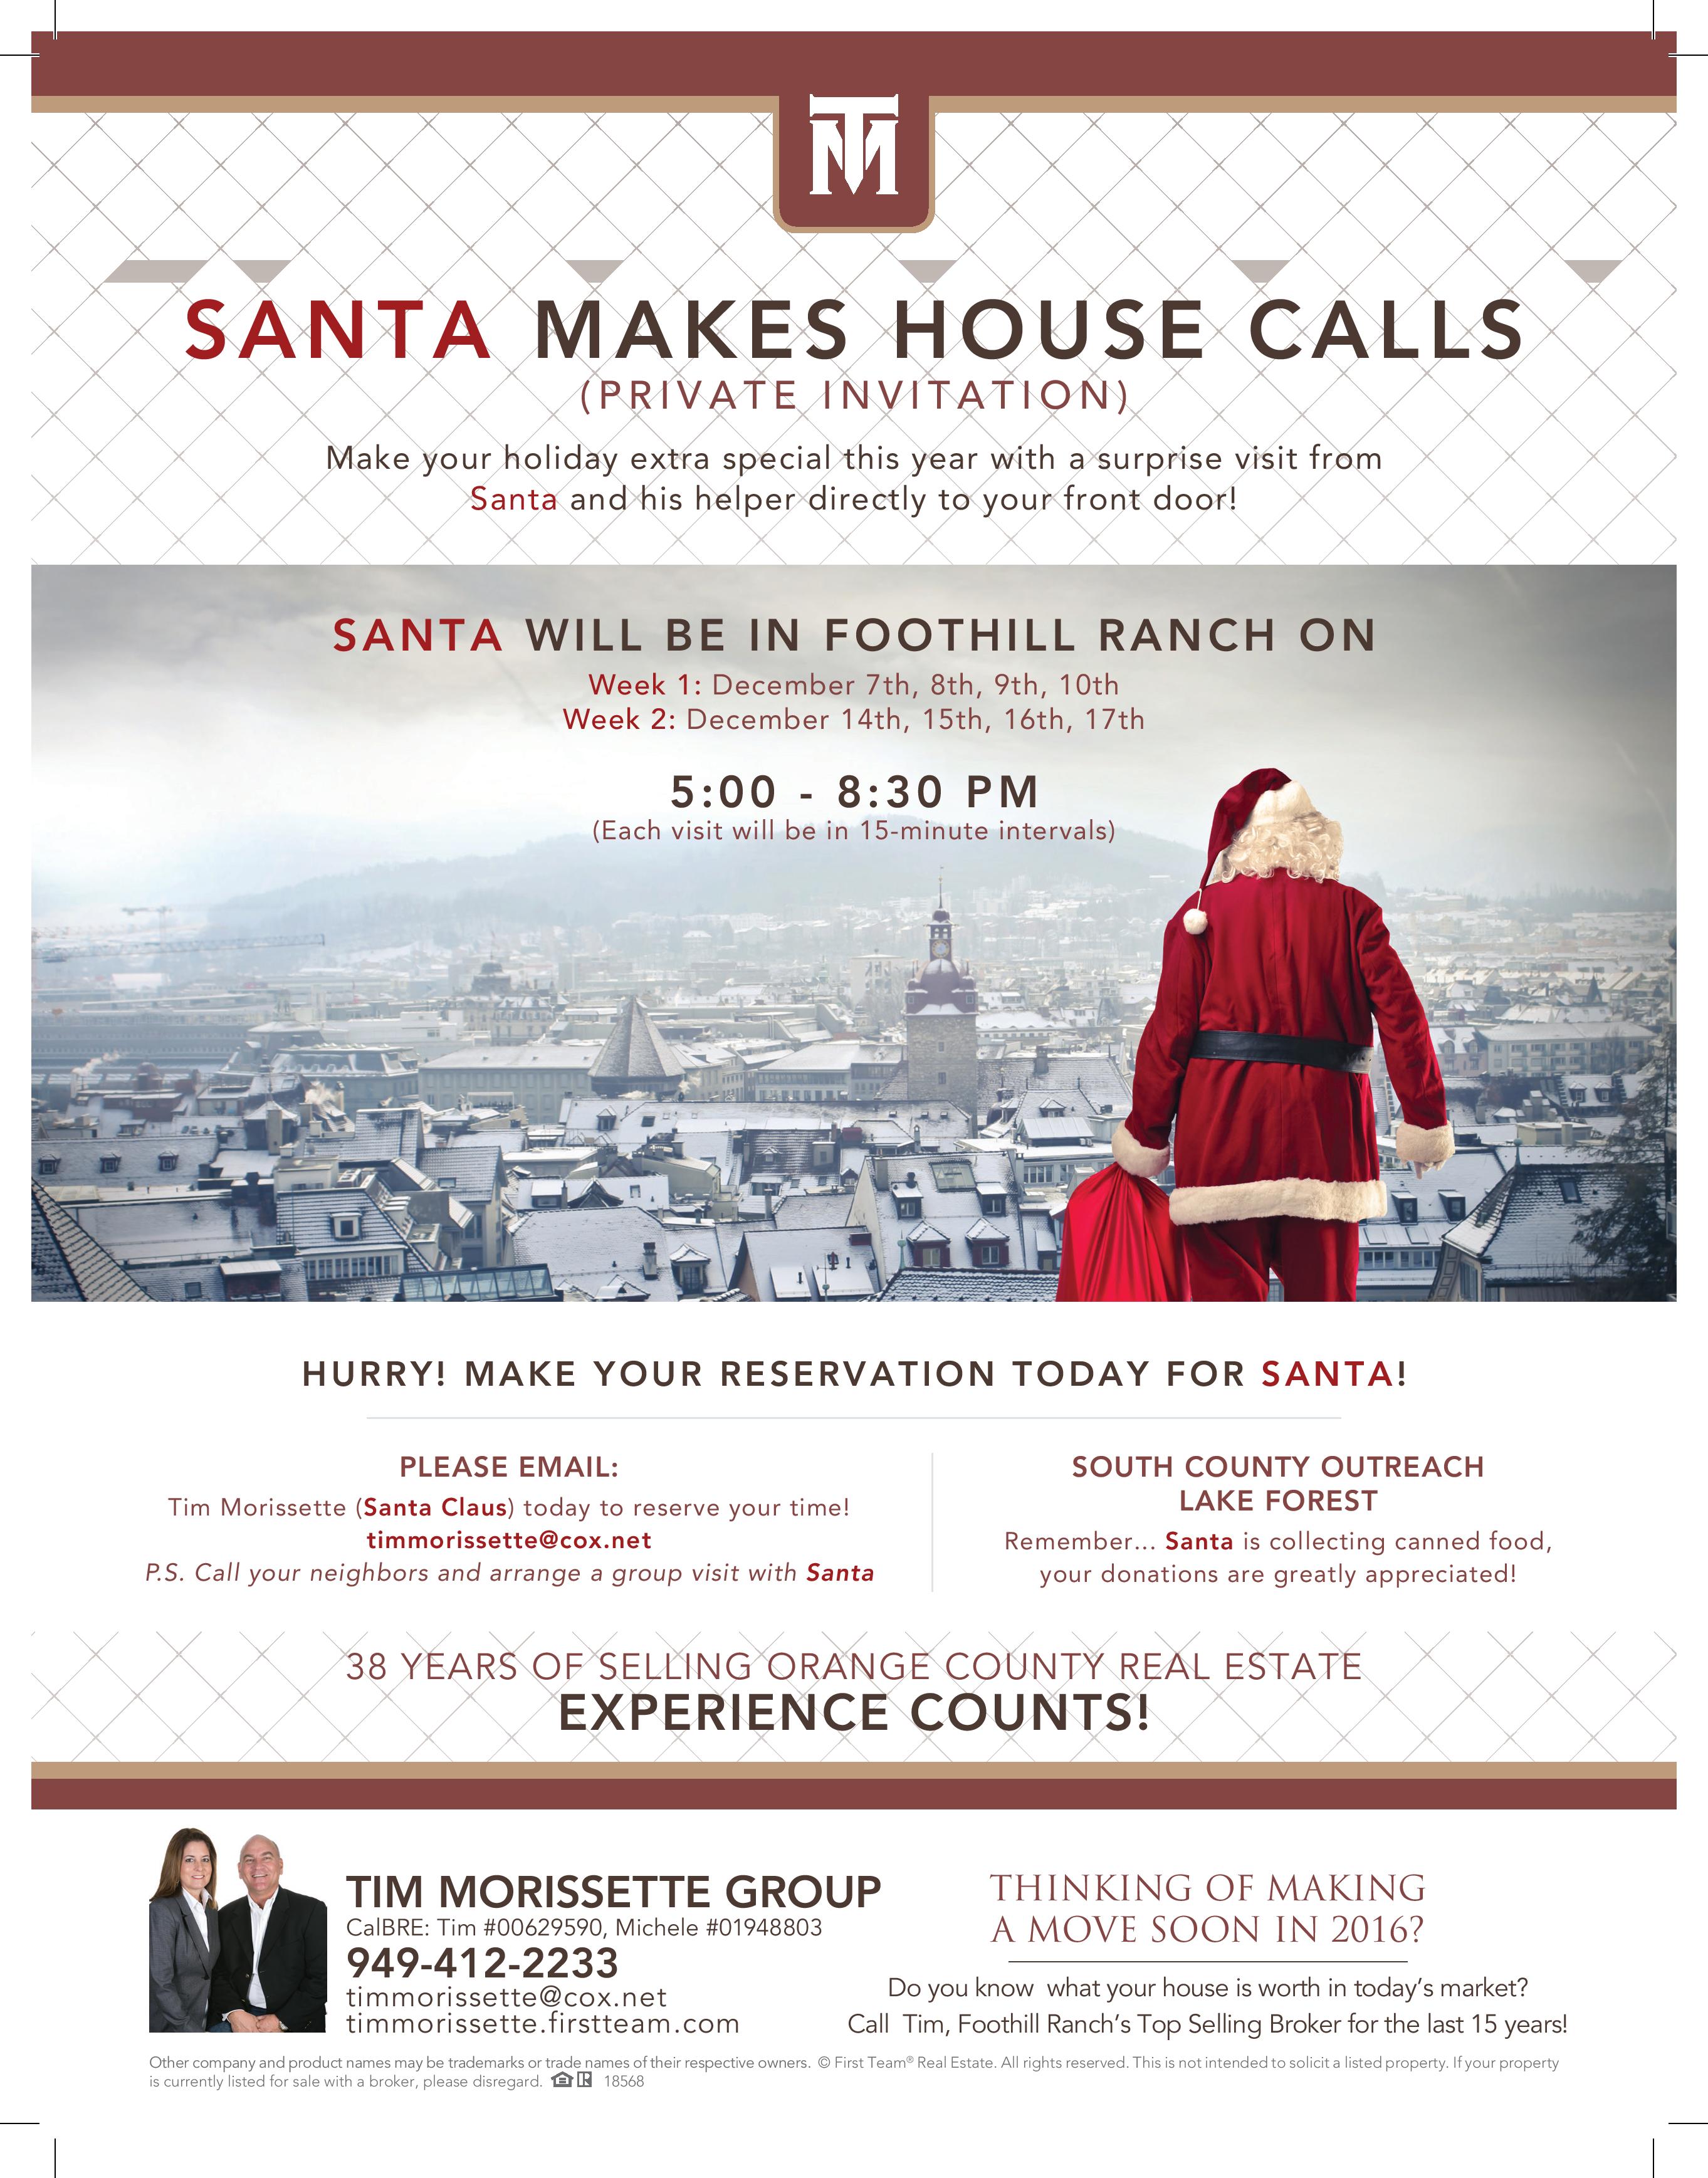 Santa comes to Foothill Ranch, CA this December to spread joy and gain donations of canned food for families in need.